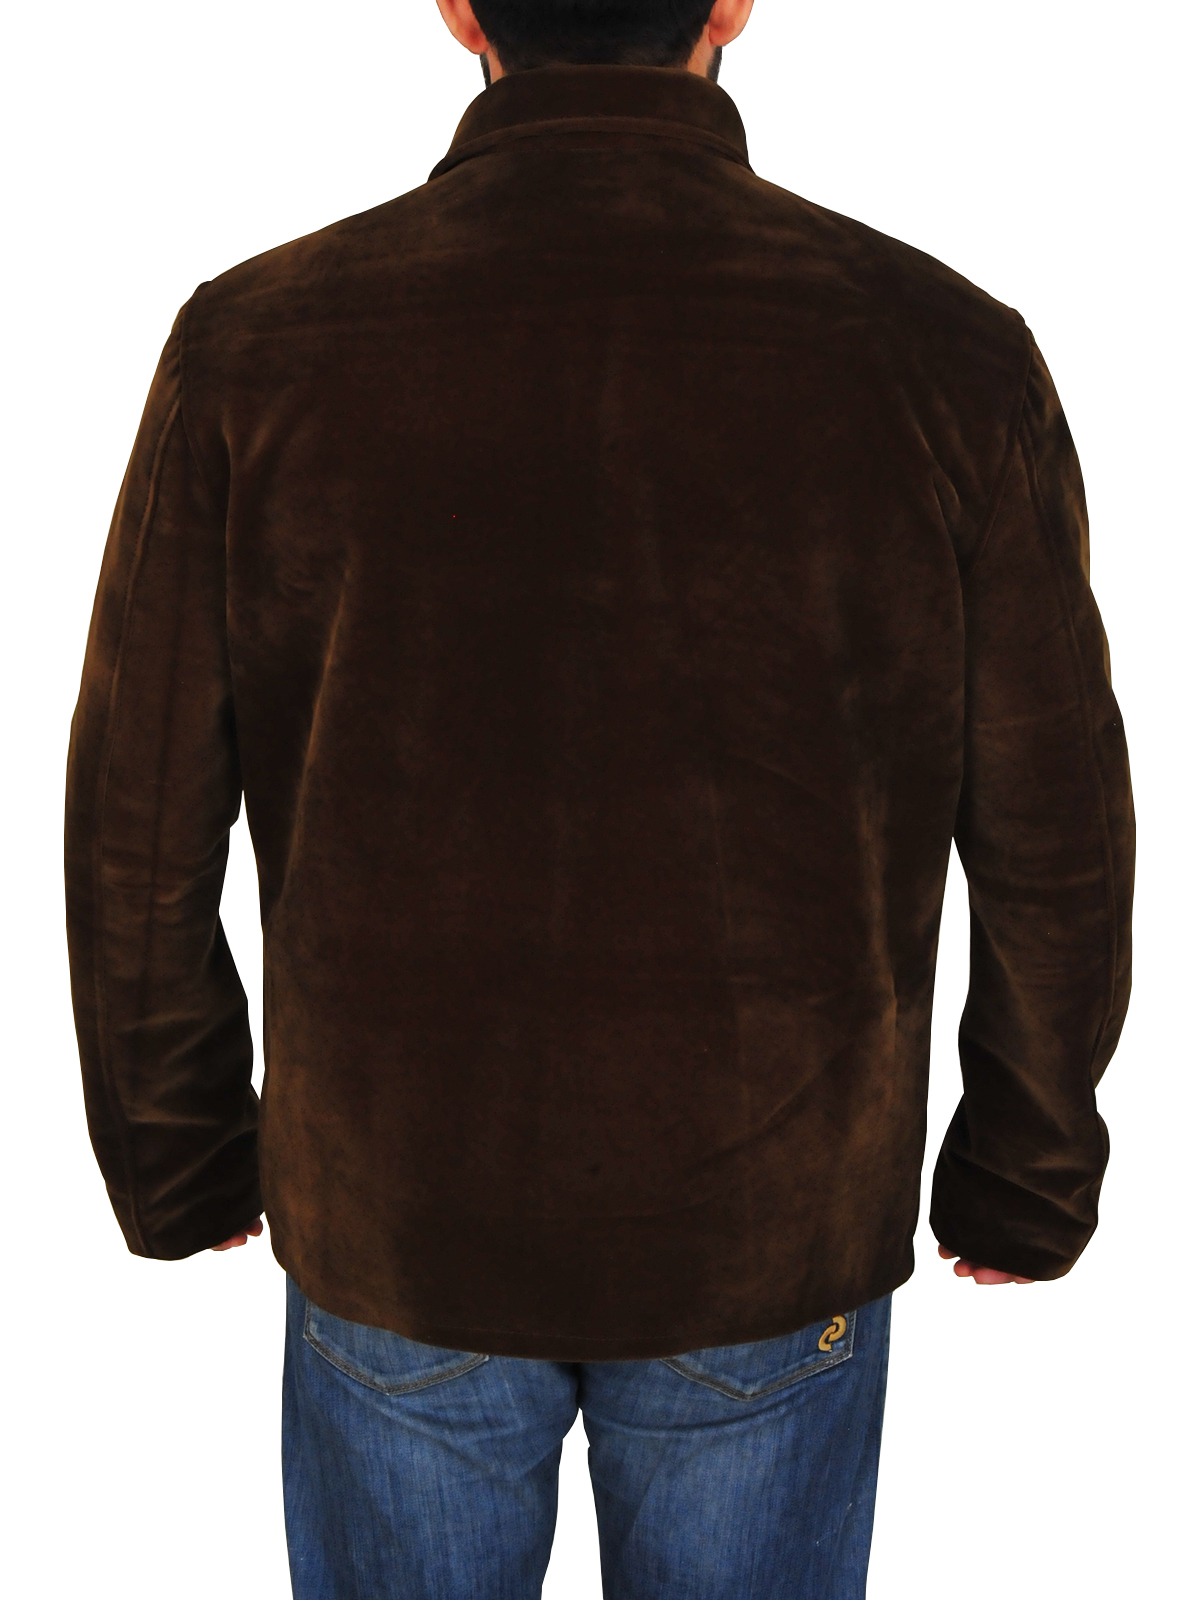 Maguire Jerry Tom Cruise Brown Jacket- RockStar Jacket